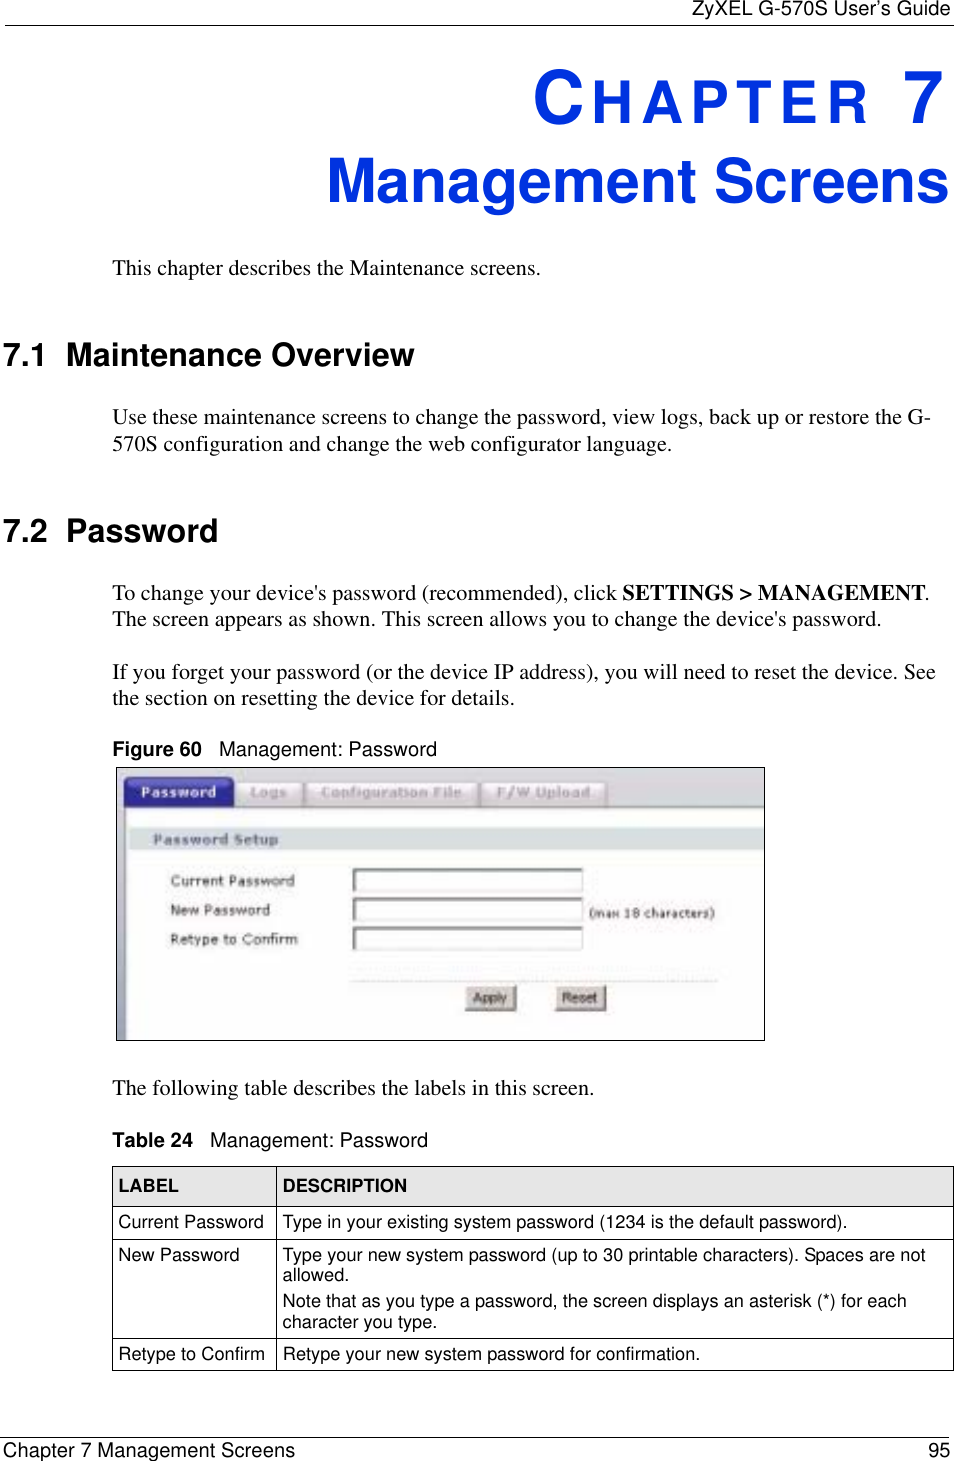 ZyXEL G-570S User’s GuideChapter 7 Management Screens 95CHAPTER 7Management ScreensThis chapter describes the Maintenance screens.7.1  Maintenance OverviewUse these maintenance screens to change the password, view logs, back up or restore the G-570S configuration and change the web configurator language. 7.2  Password To change your device&apos;s password (recommended), click SETTINGS &gt; MANAGEMENT.The screen appears as shown. This screen allows you to change the device&apos;s password.If you forget your password (or the device IP address), you will need to reset the device. See the section on resetting the device for details.Figure 60   Management: PasswordThe following table describes the labels in this screen. Table 24   Management: Password LABEL DESCRIPTIONCurrent Password Type in your existing system password (1234 is the default password).New Password Type your new system password (up to 30 printable characters). Spaces are not allowed.Note that as you type a password, the screen displays an asterisk (*) for each character you type.Retype to Confirm Retype your new system password for confirmation.